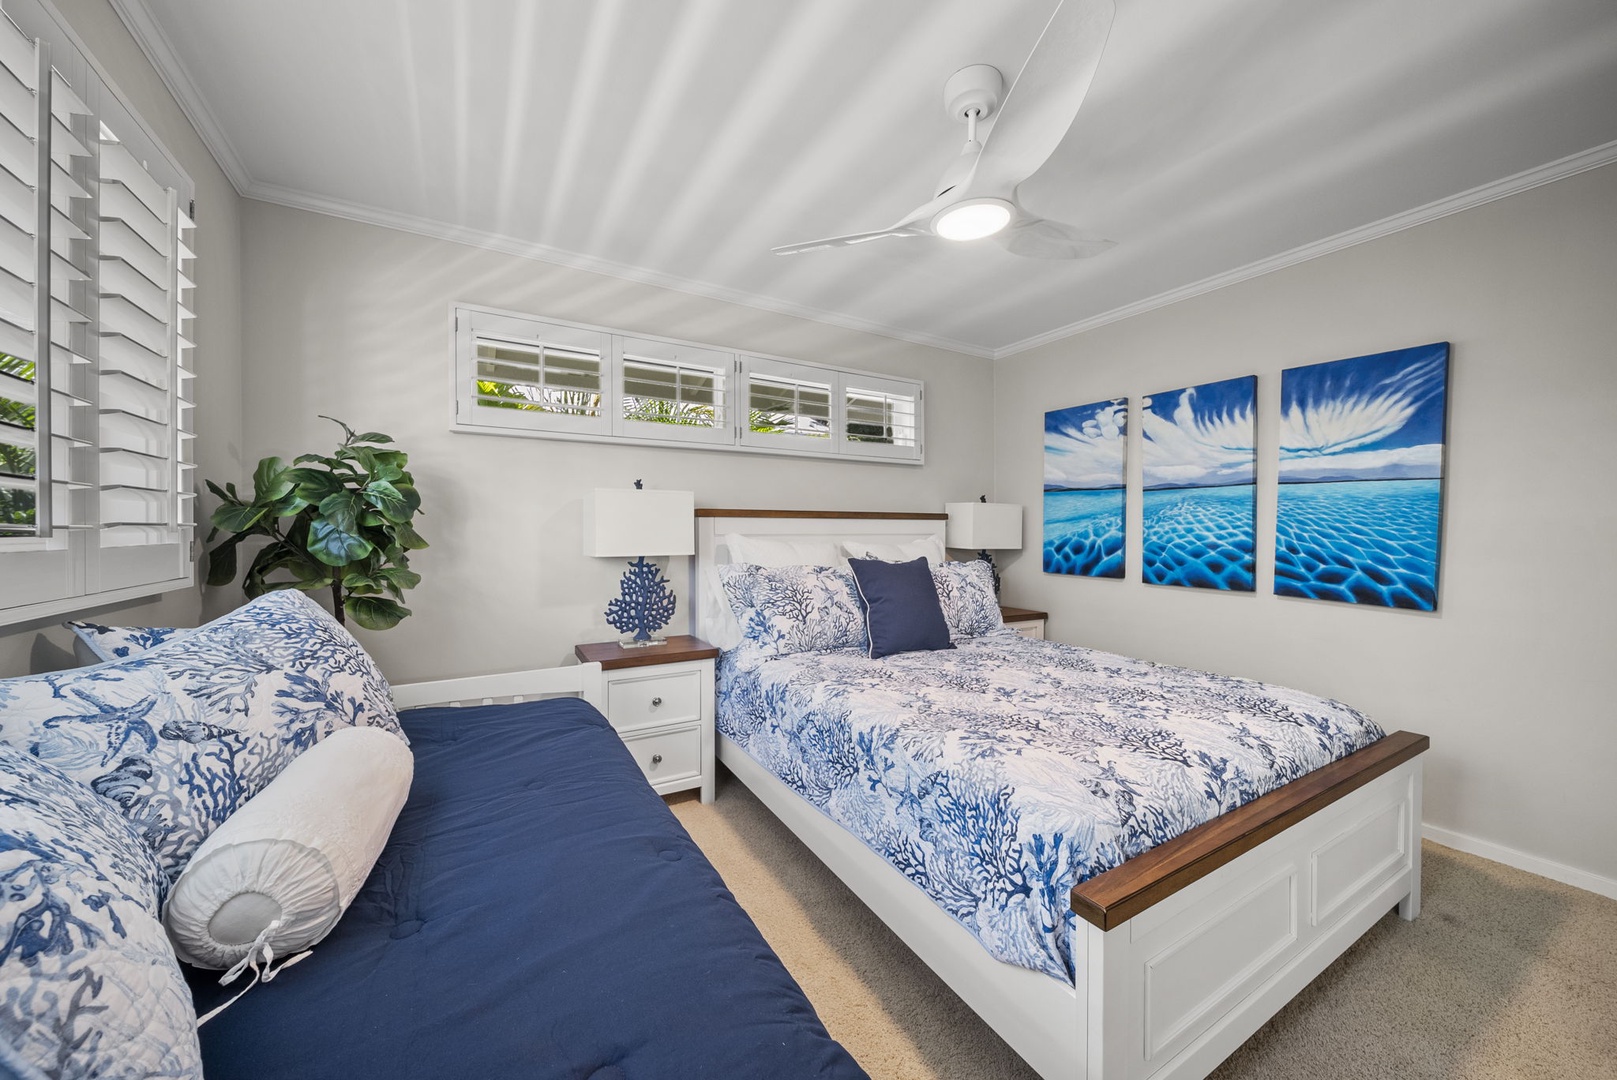 Waimanalo Vacation Rentals, Mana Kai at Waimanalo - Guest Bedroom 3 with a queen and a twin bed